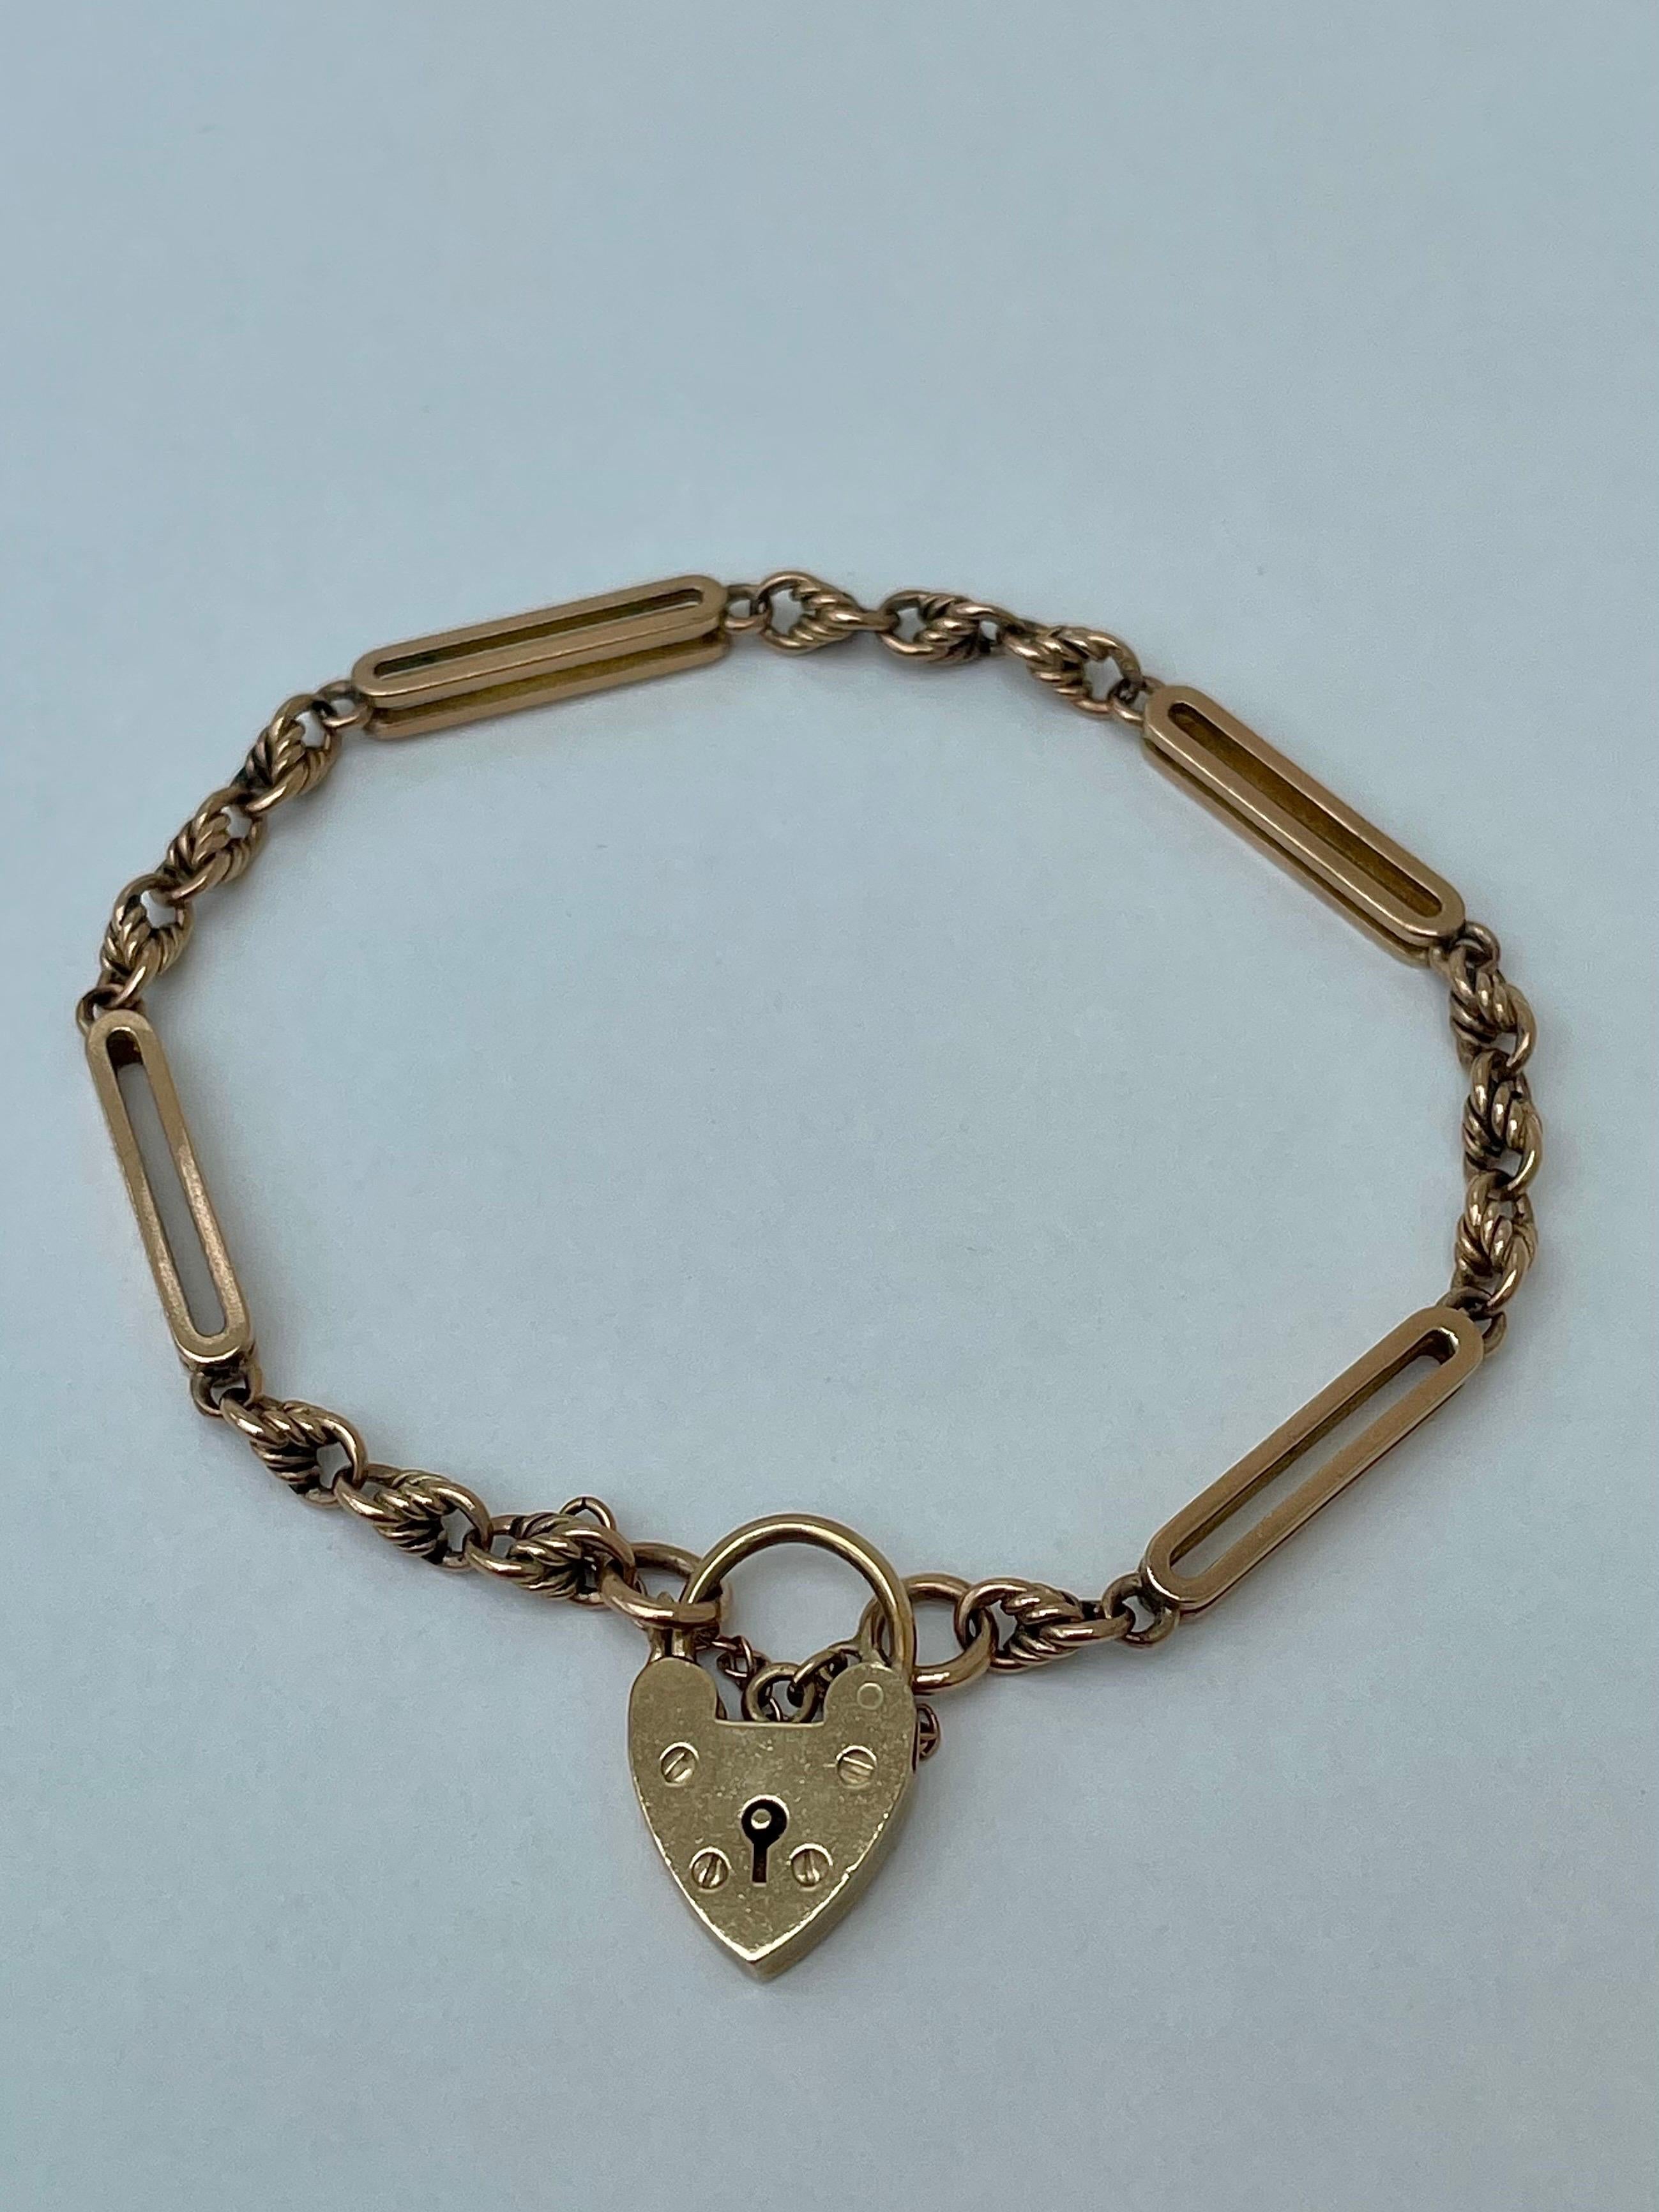 Pretty Antique 9ct Yellow Gold Curb Bracelet with Heart Padlock 

two beautiful different type of links, she’s precious! 

The item comes without the box in the photos but will be presented in a gift box

Measurements: weight 9.69g, length 18cm,